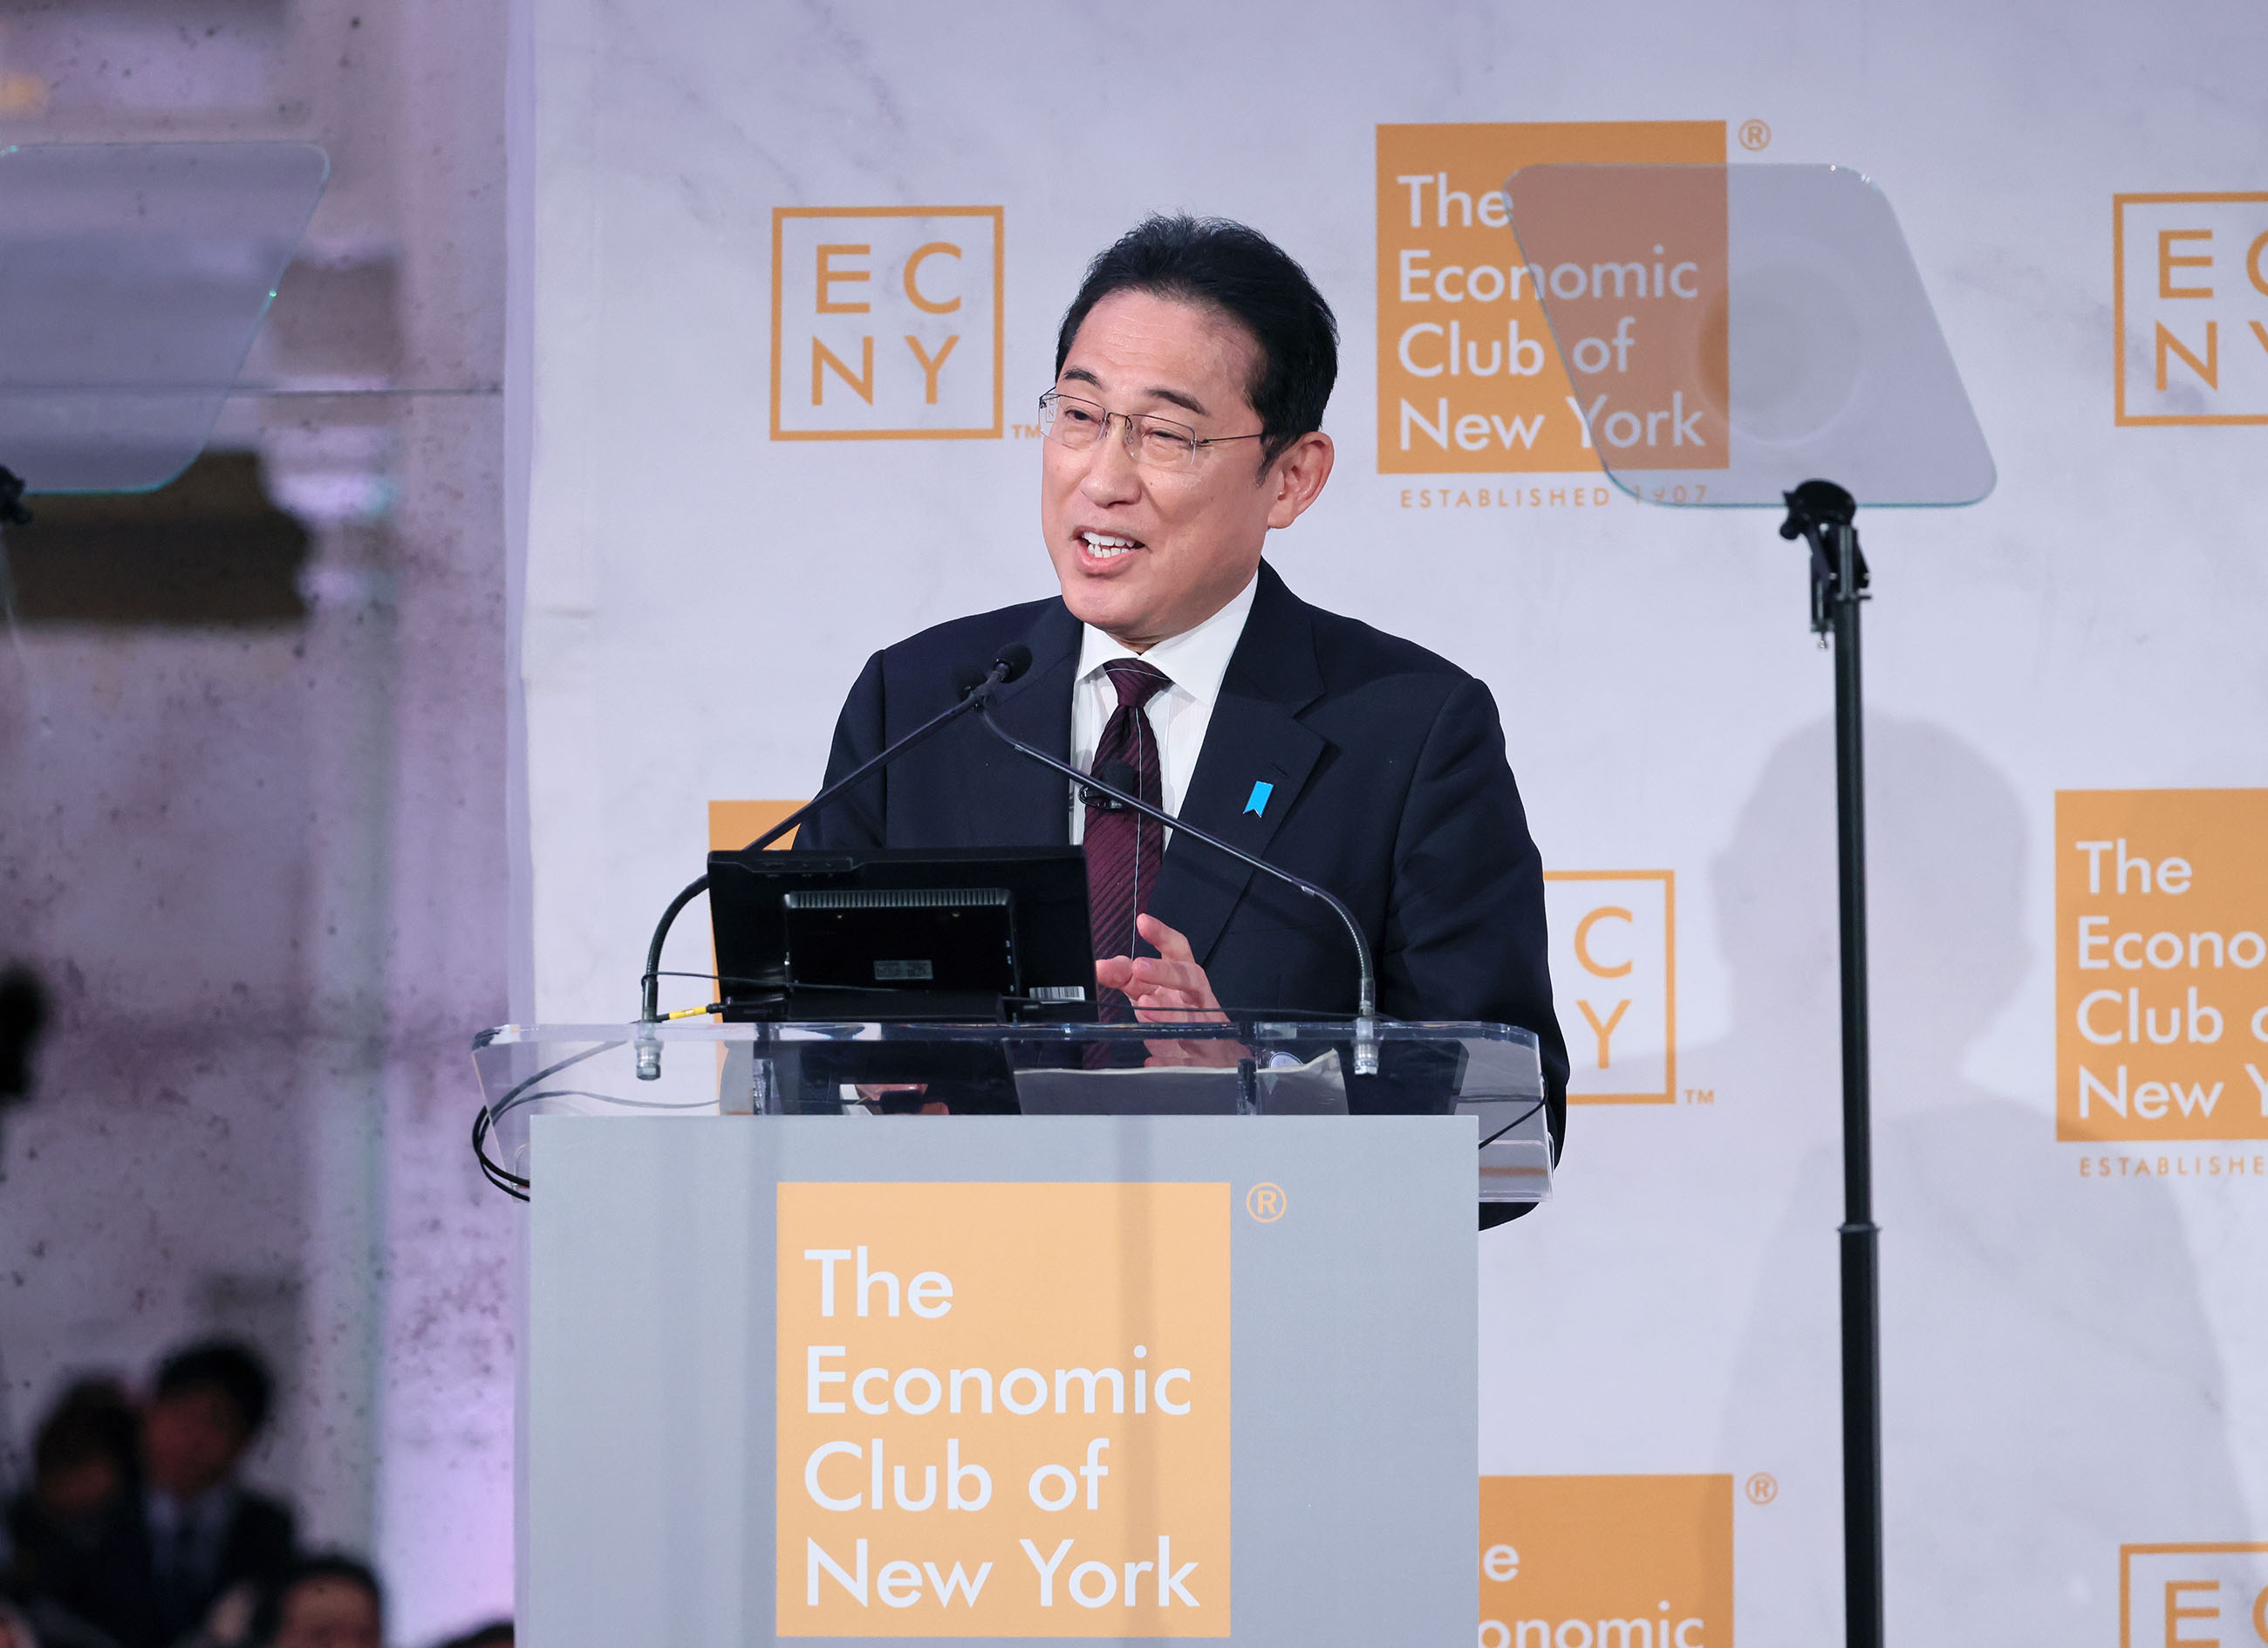 Prime Minister Kishida delivering his remarks to the Economic Club of New York (5)